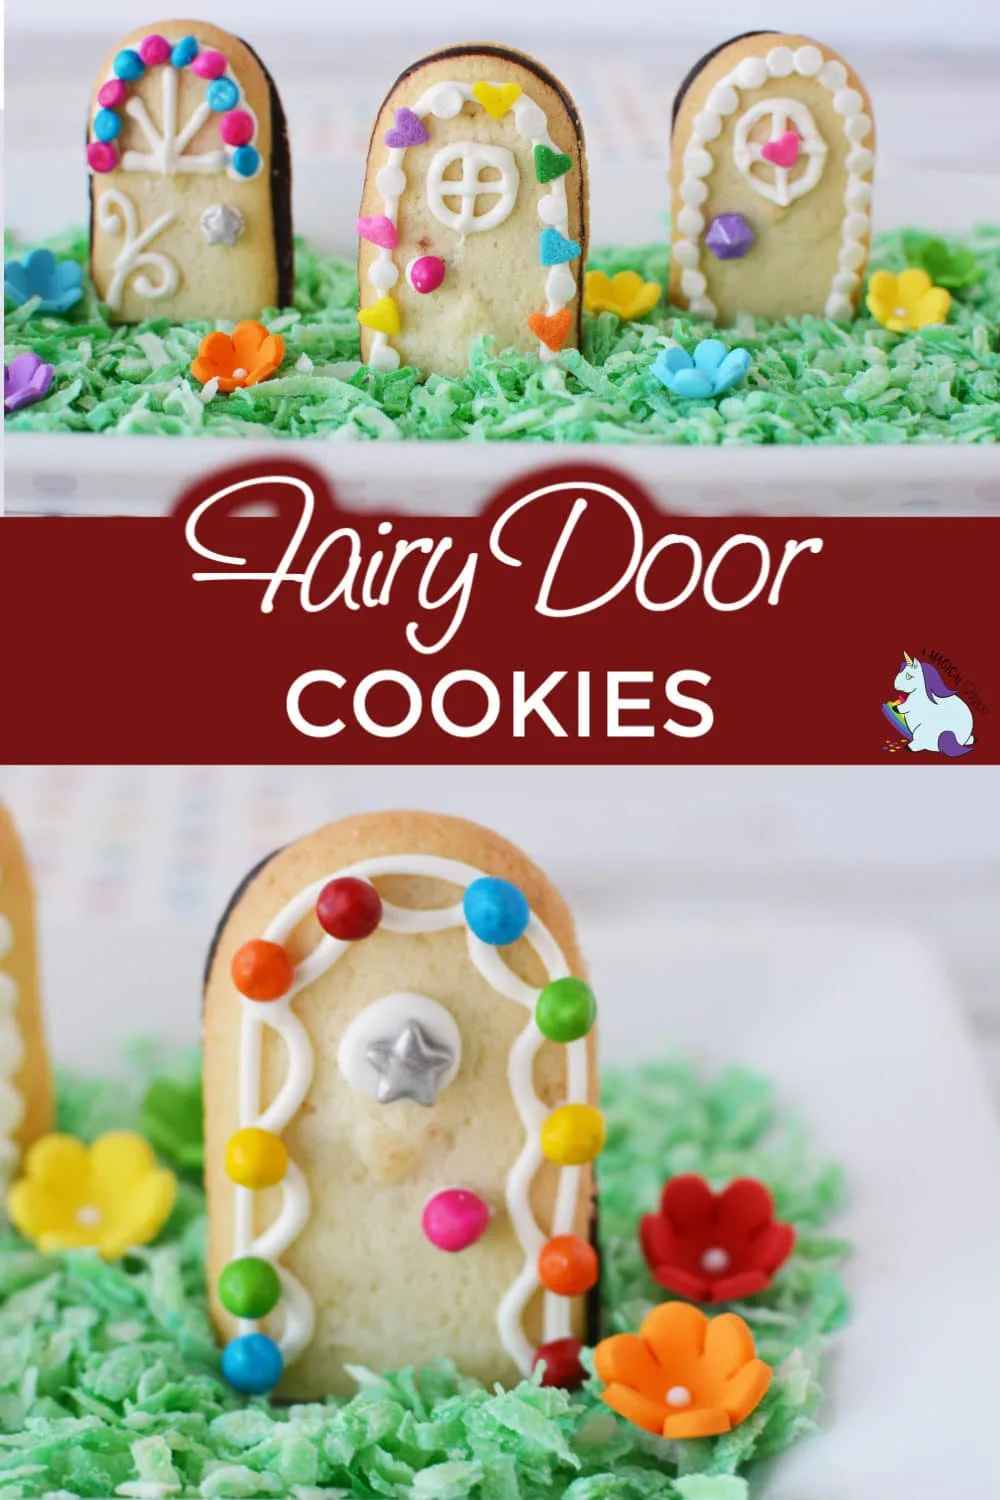 Magical Fairy Door cookies sitting on edible grass in a dish with sugar flowers. 